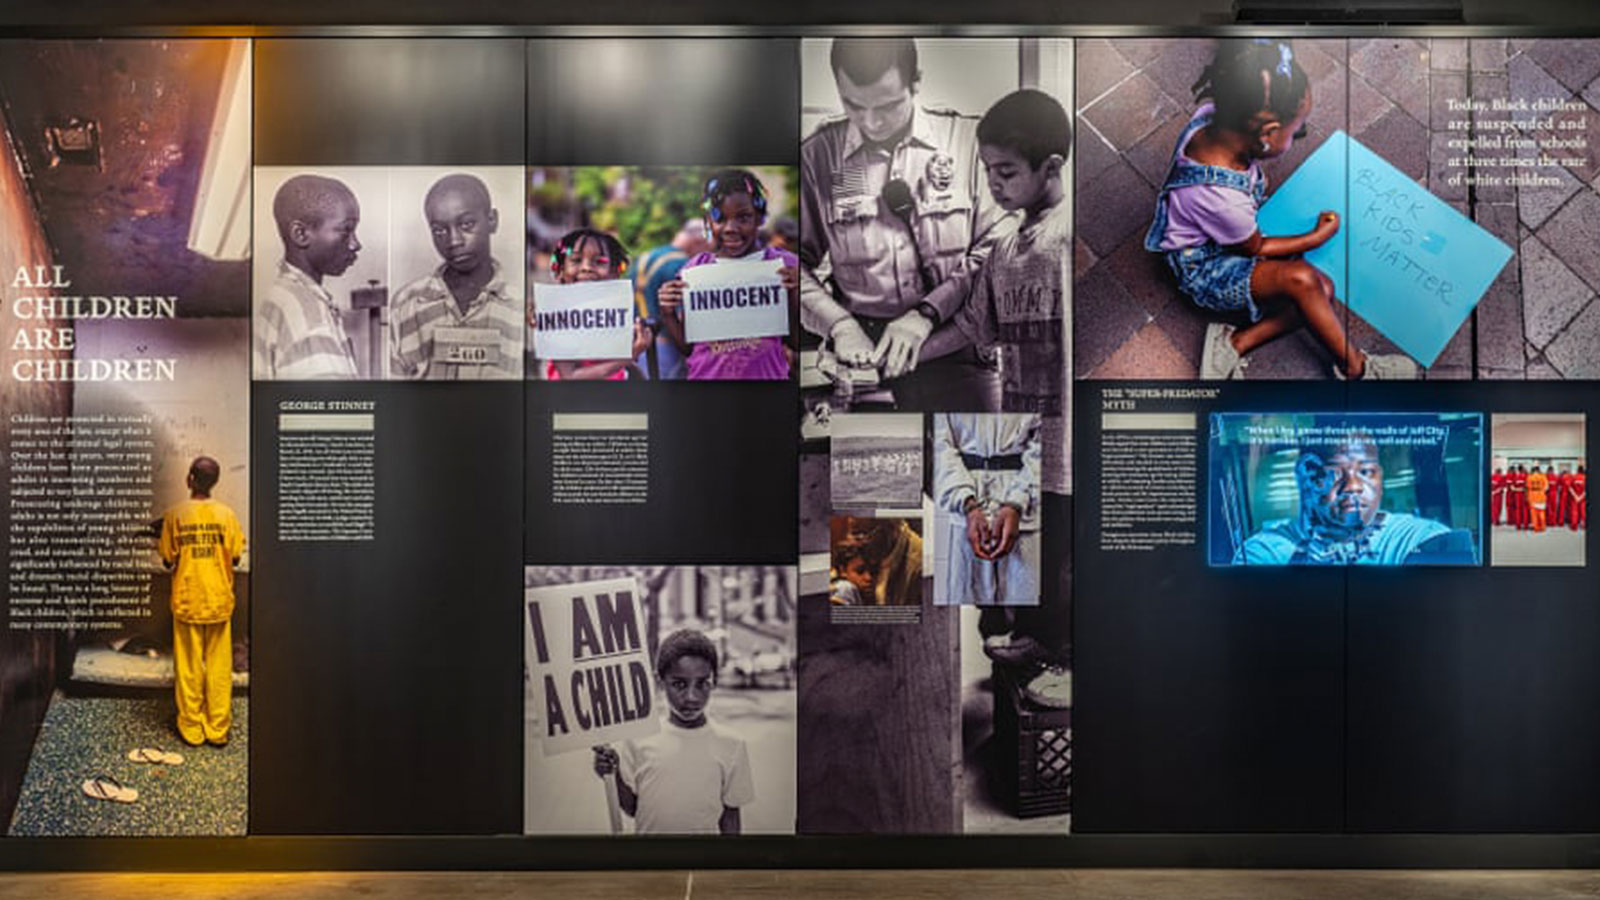 ‘The museum makes plain that the sores of America’s racial wounds remain very much open.’ 